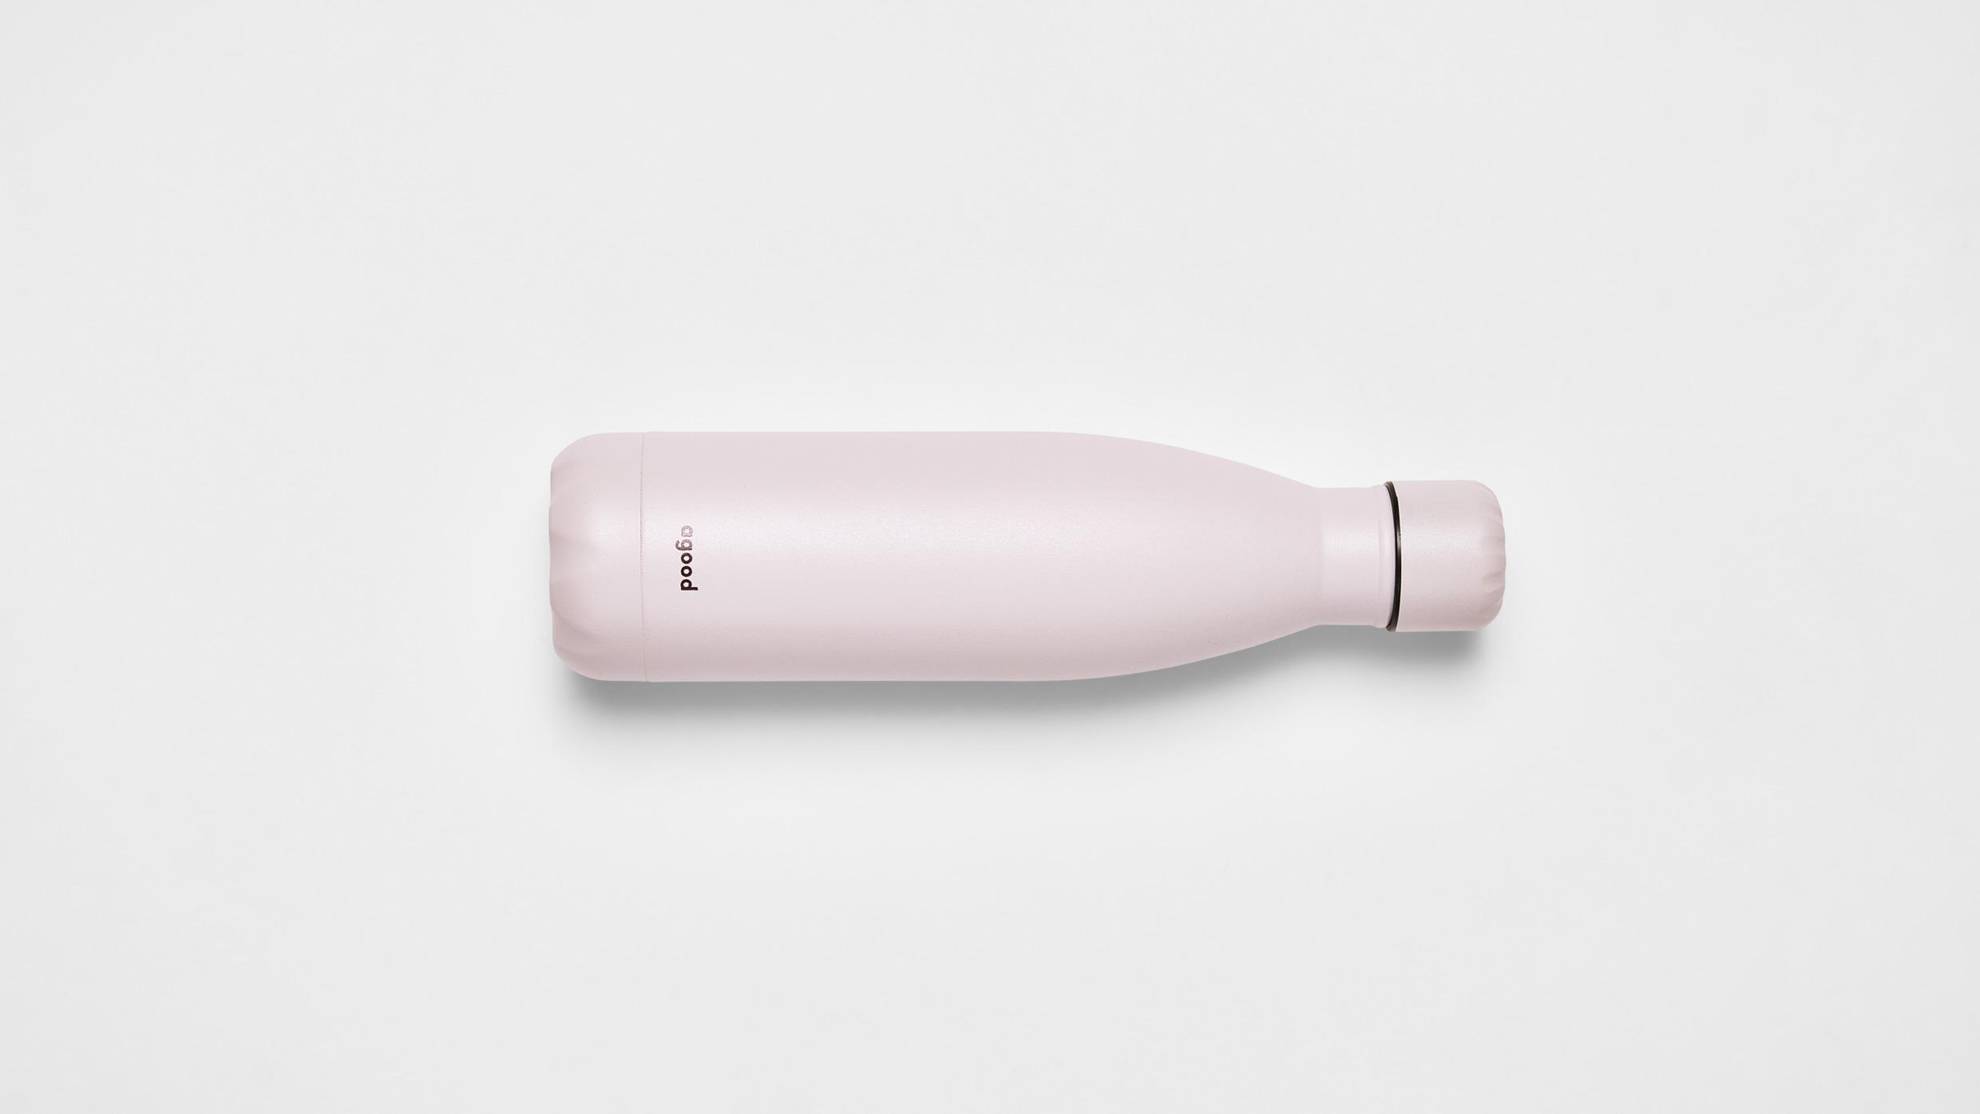 A pink steel water bottle on a white surface.